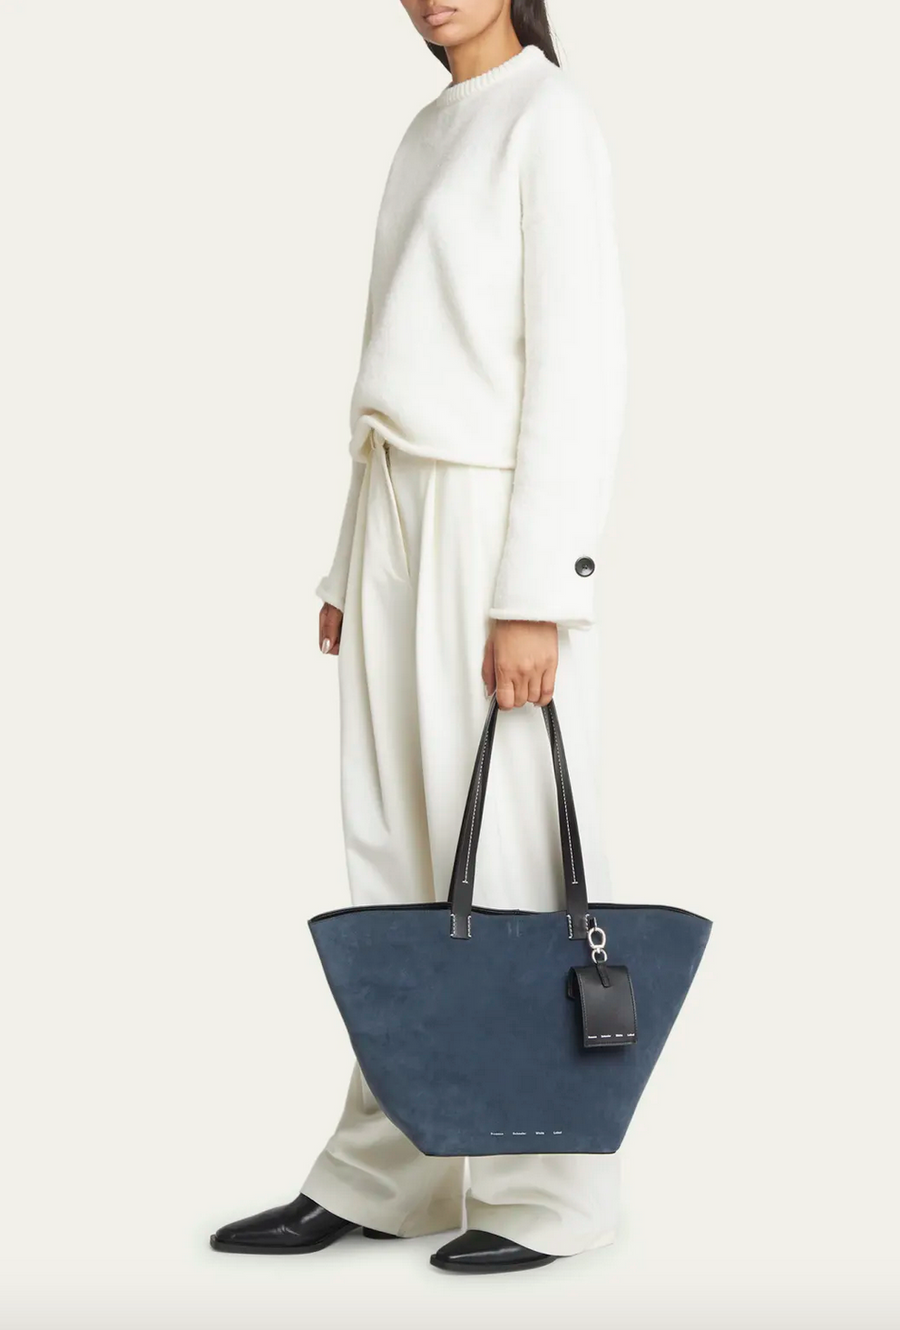 Proenza Schouler White Label Large Suede Bedford Tote